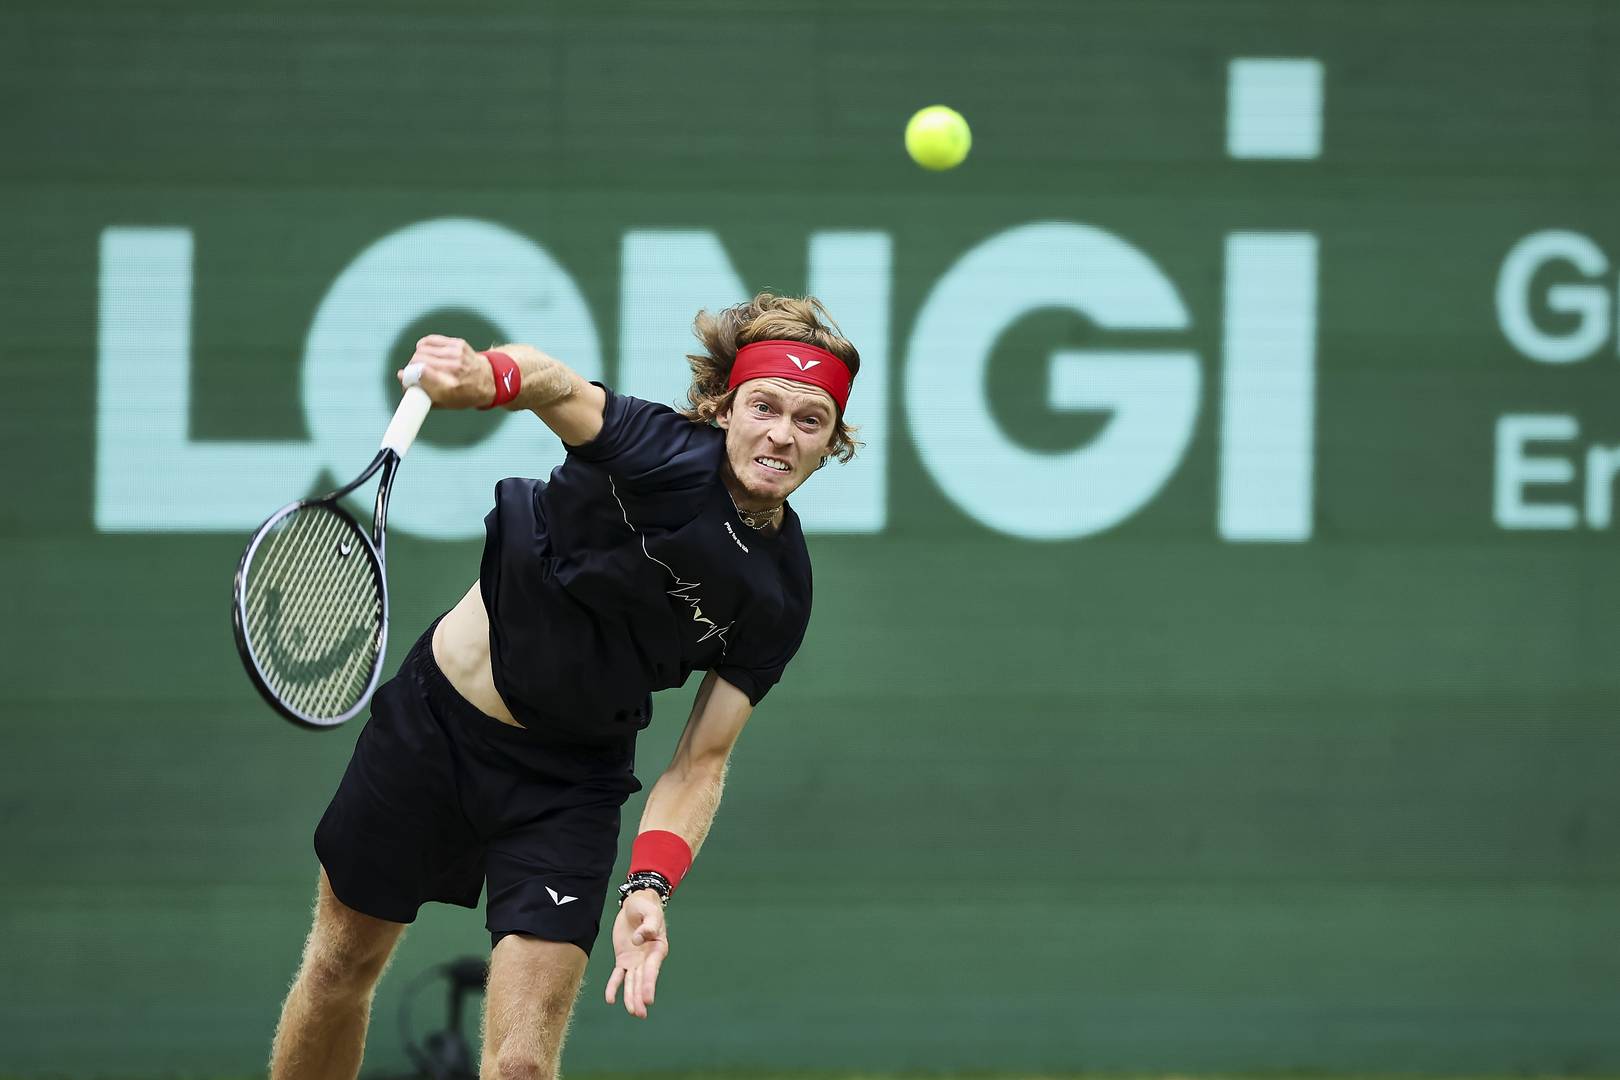 Rublev aims at second title shot in Halle